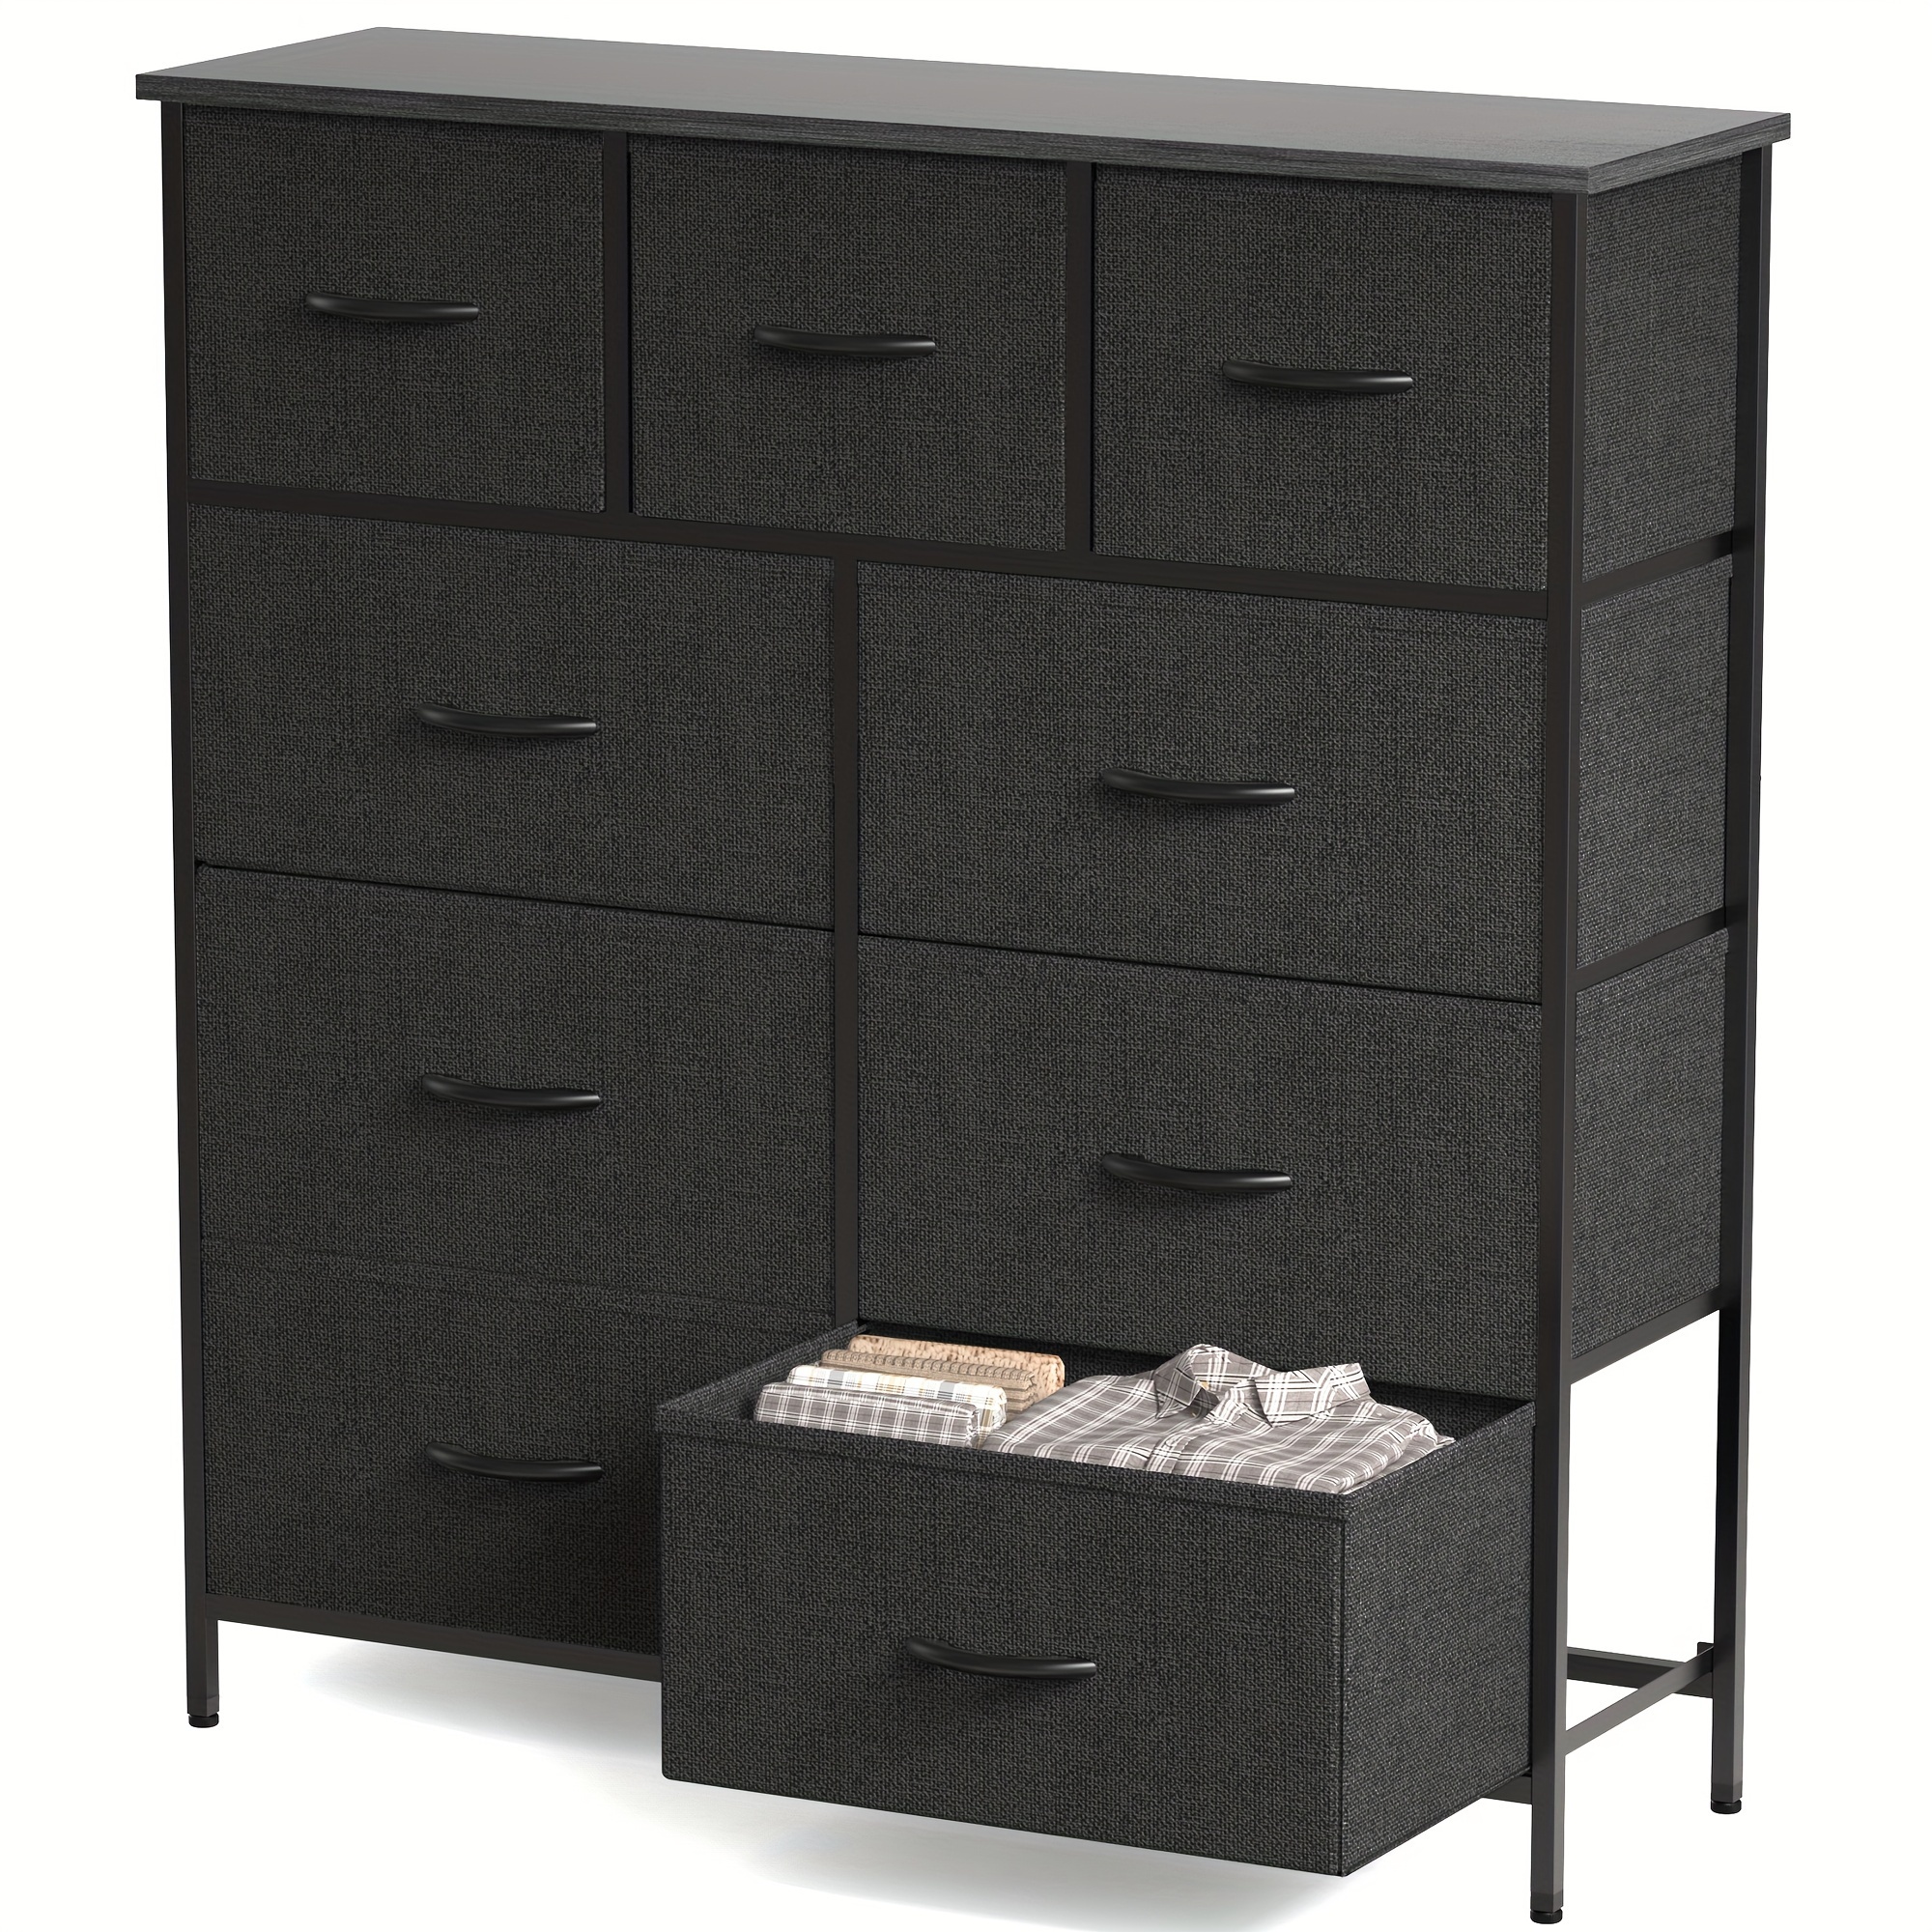 

9 Drawers Dresser For Bedroom, Kidsroom Furniture, Tall Chest Tower, Storage Organizer Units For Clothing, Closet, Fabric Bins, Wood Top, Steel Frame, Lightweight, Assemble Tools Include